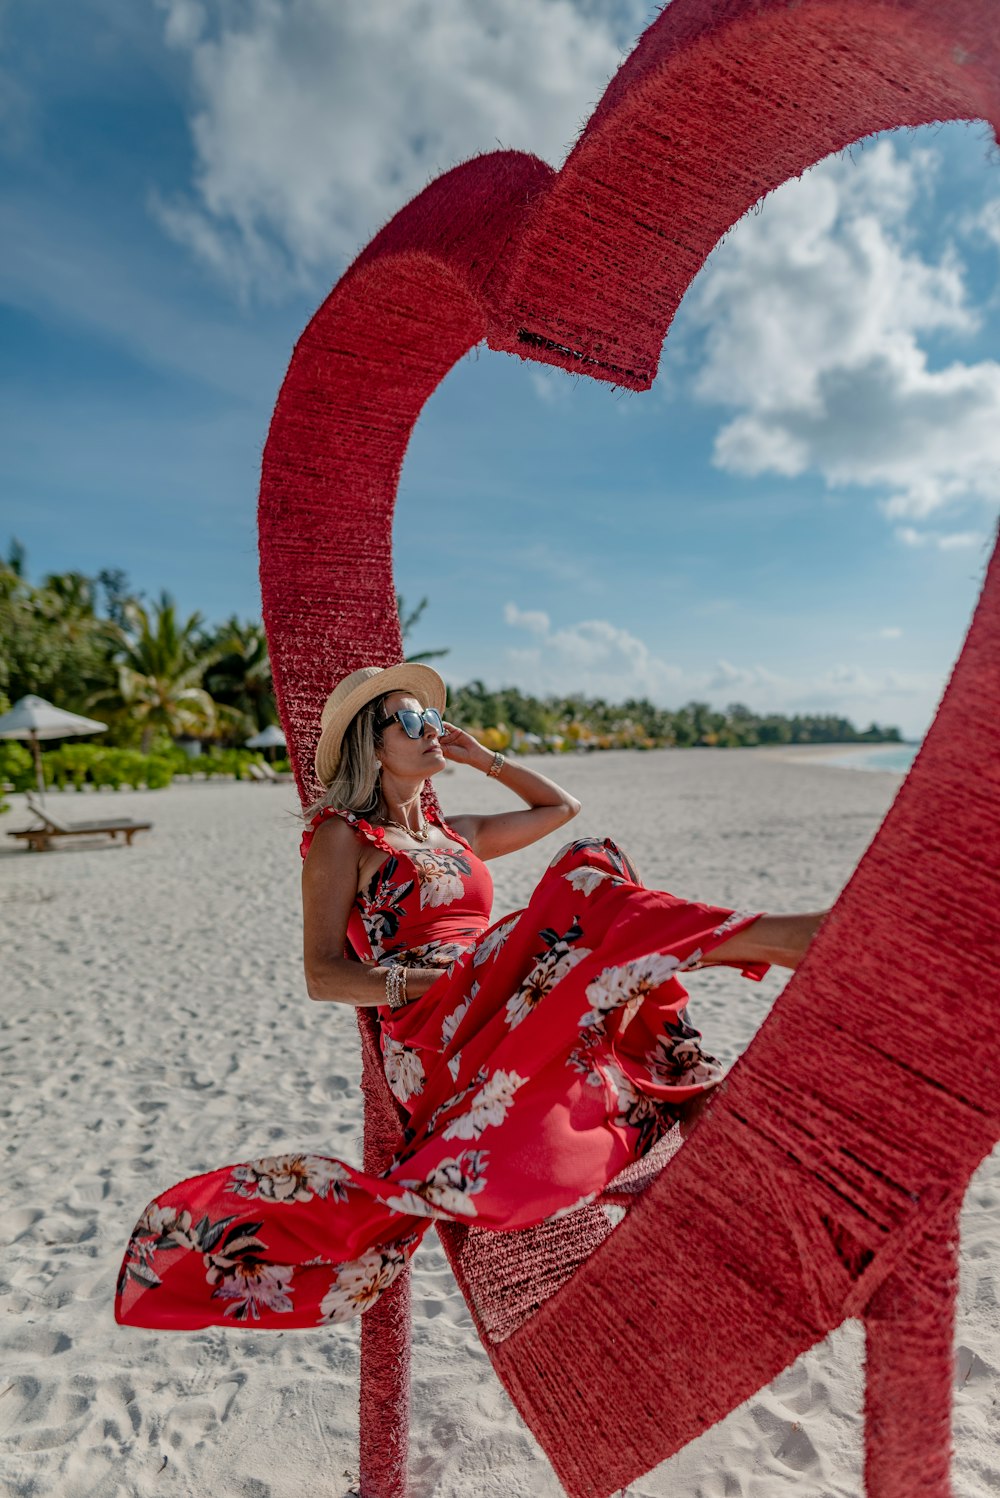 a woman in a red dress standing on a beach